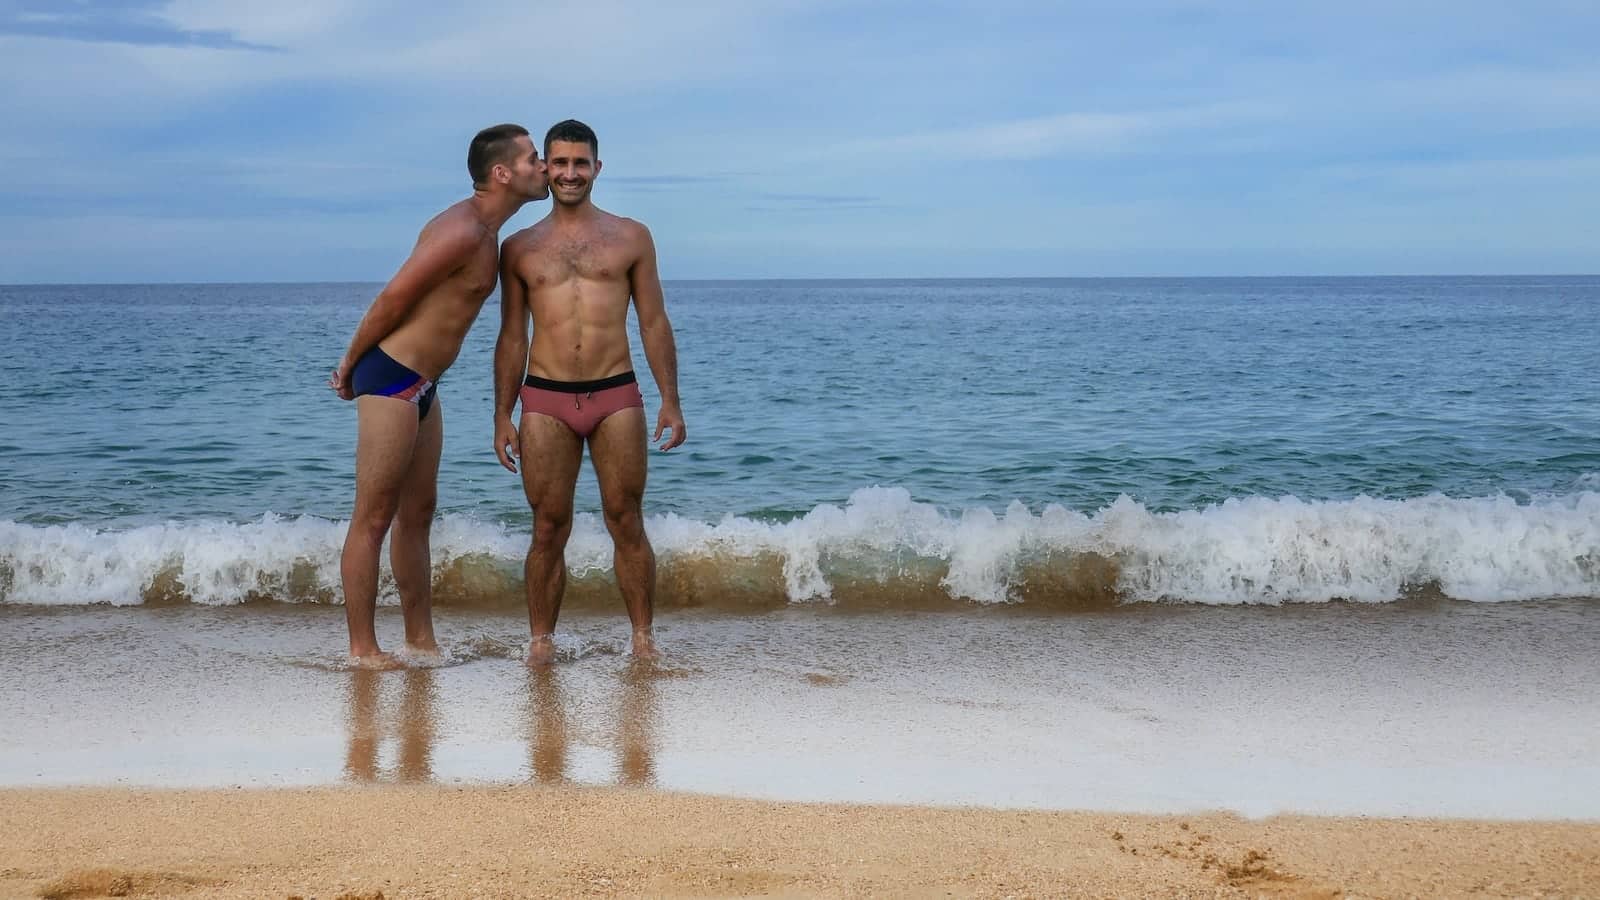 Ibiza is one of the most gay friendly islands in the world